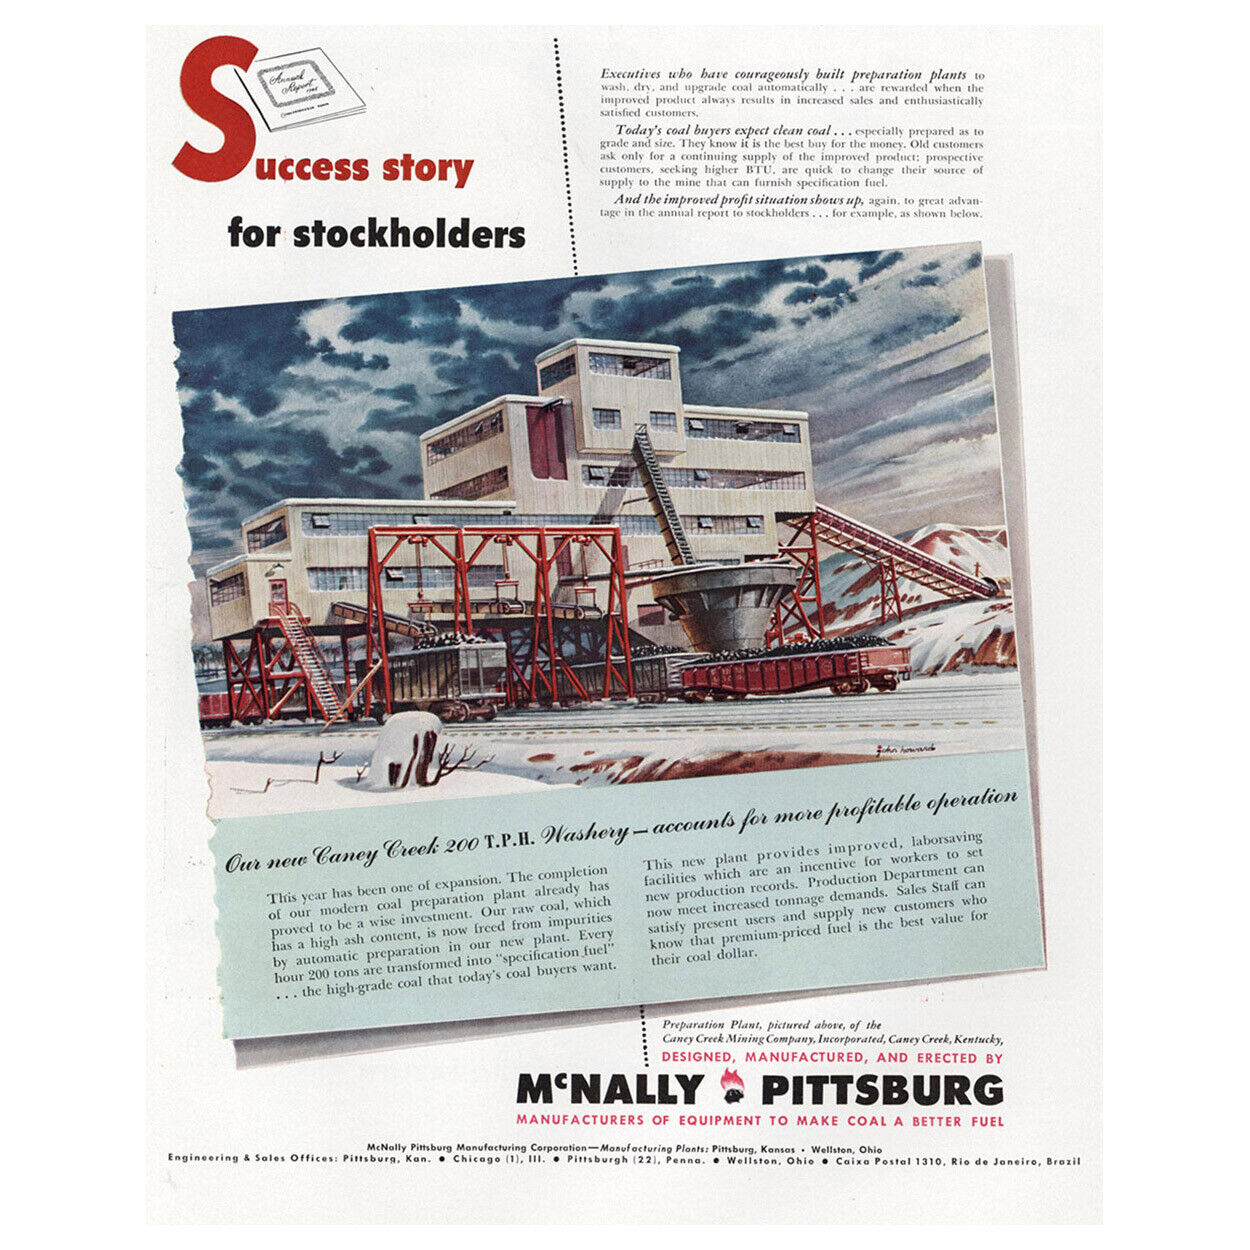 John C Howard&apos;s 1949 illustration of Pittsburgh coal mill in vintage ad.